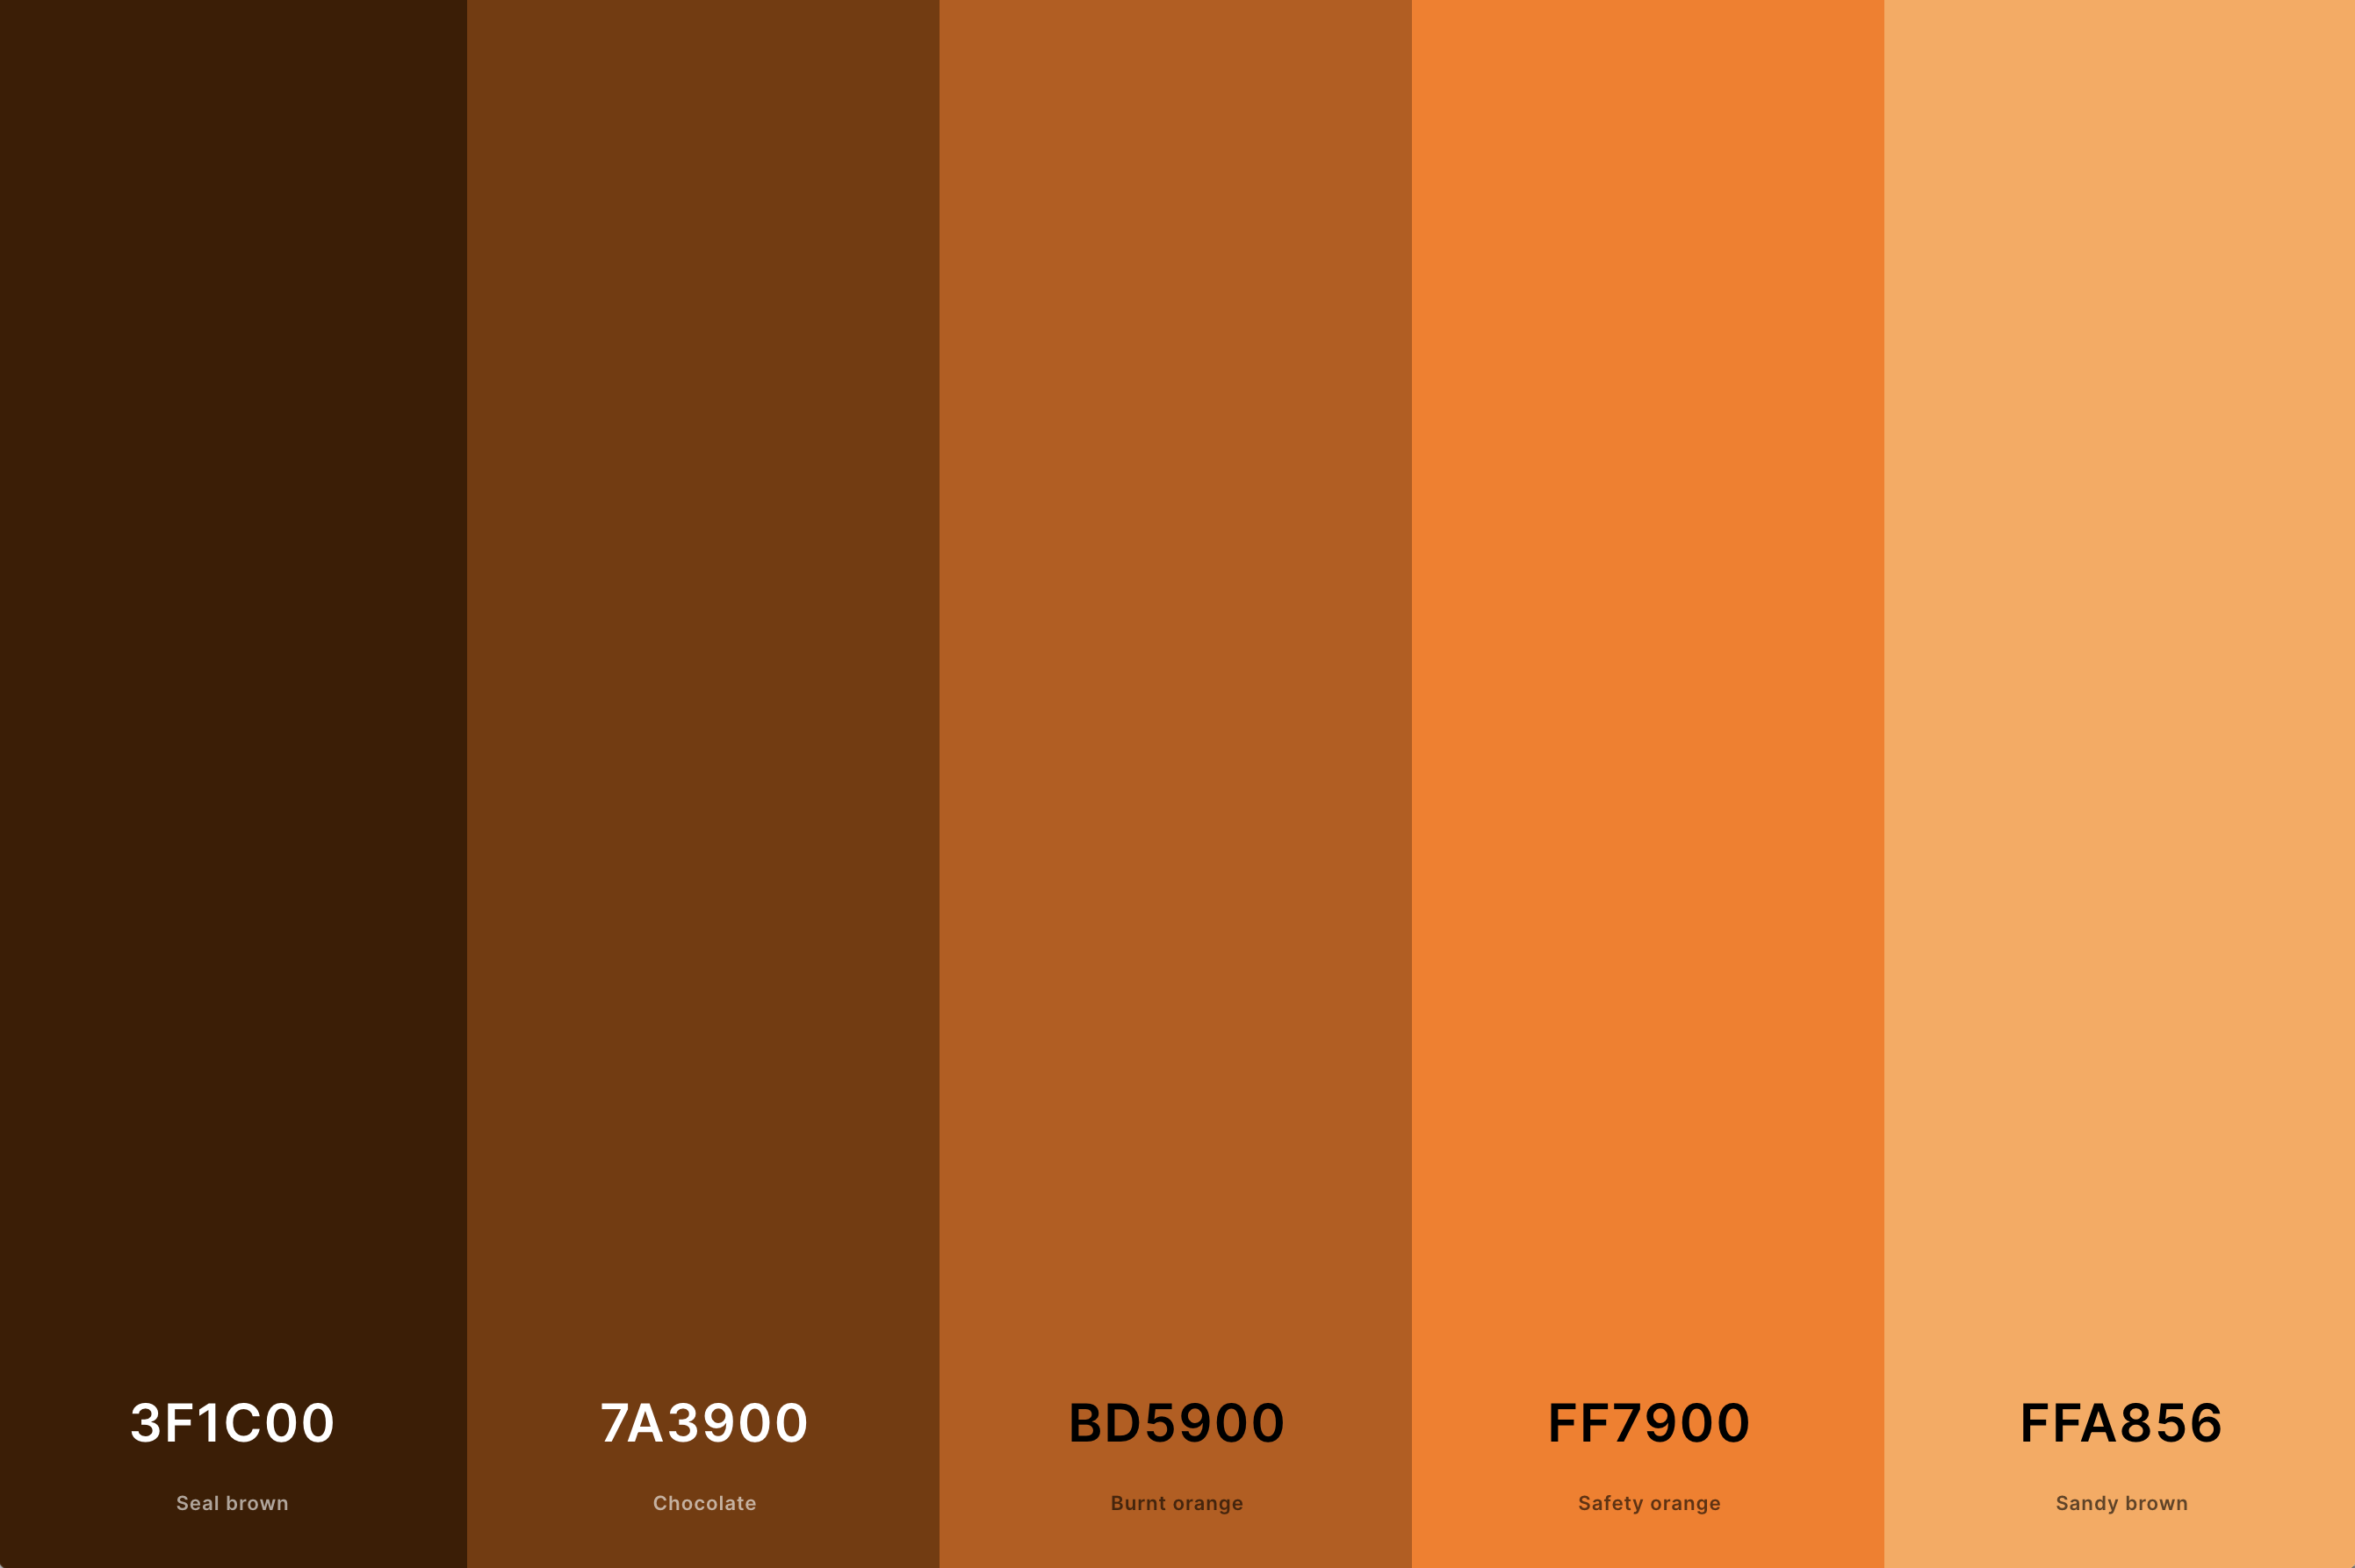 14. Orange And Brown Color Palette Color Palette with Seal Brown (Hex #3F1C00) + Chocolate (Hex #7A3900) + Burnt Orange (Hex #BD5900) + Safety Orange (Hex #FF7900) + Sandy Brown (Hex #FFA856) Color Palette with Hex Codes